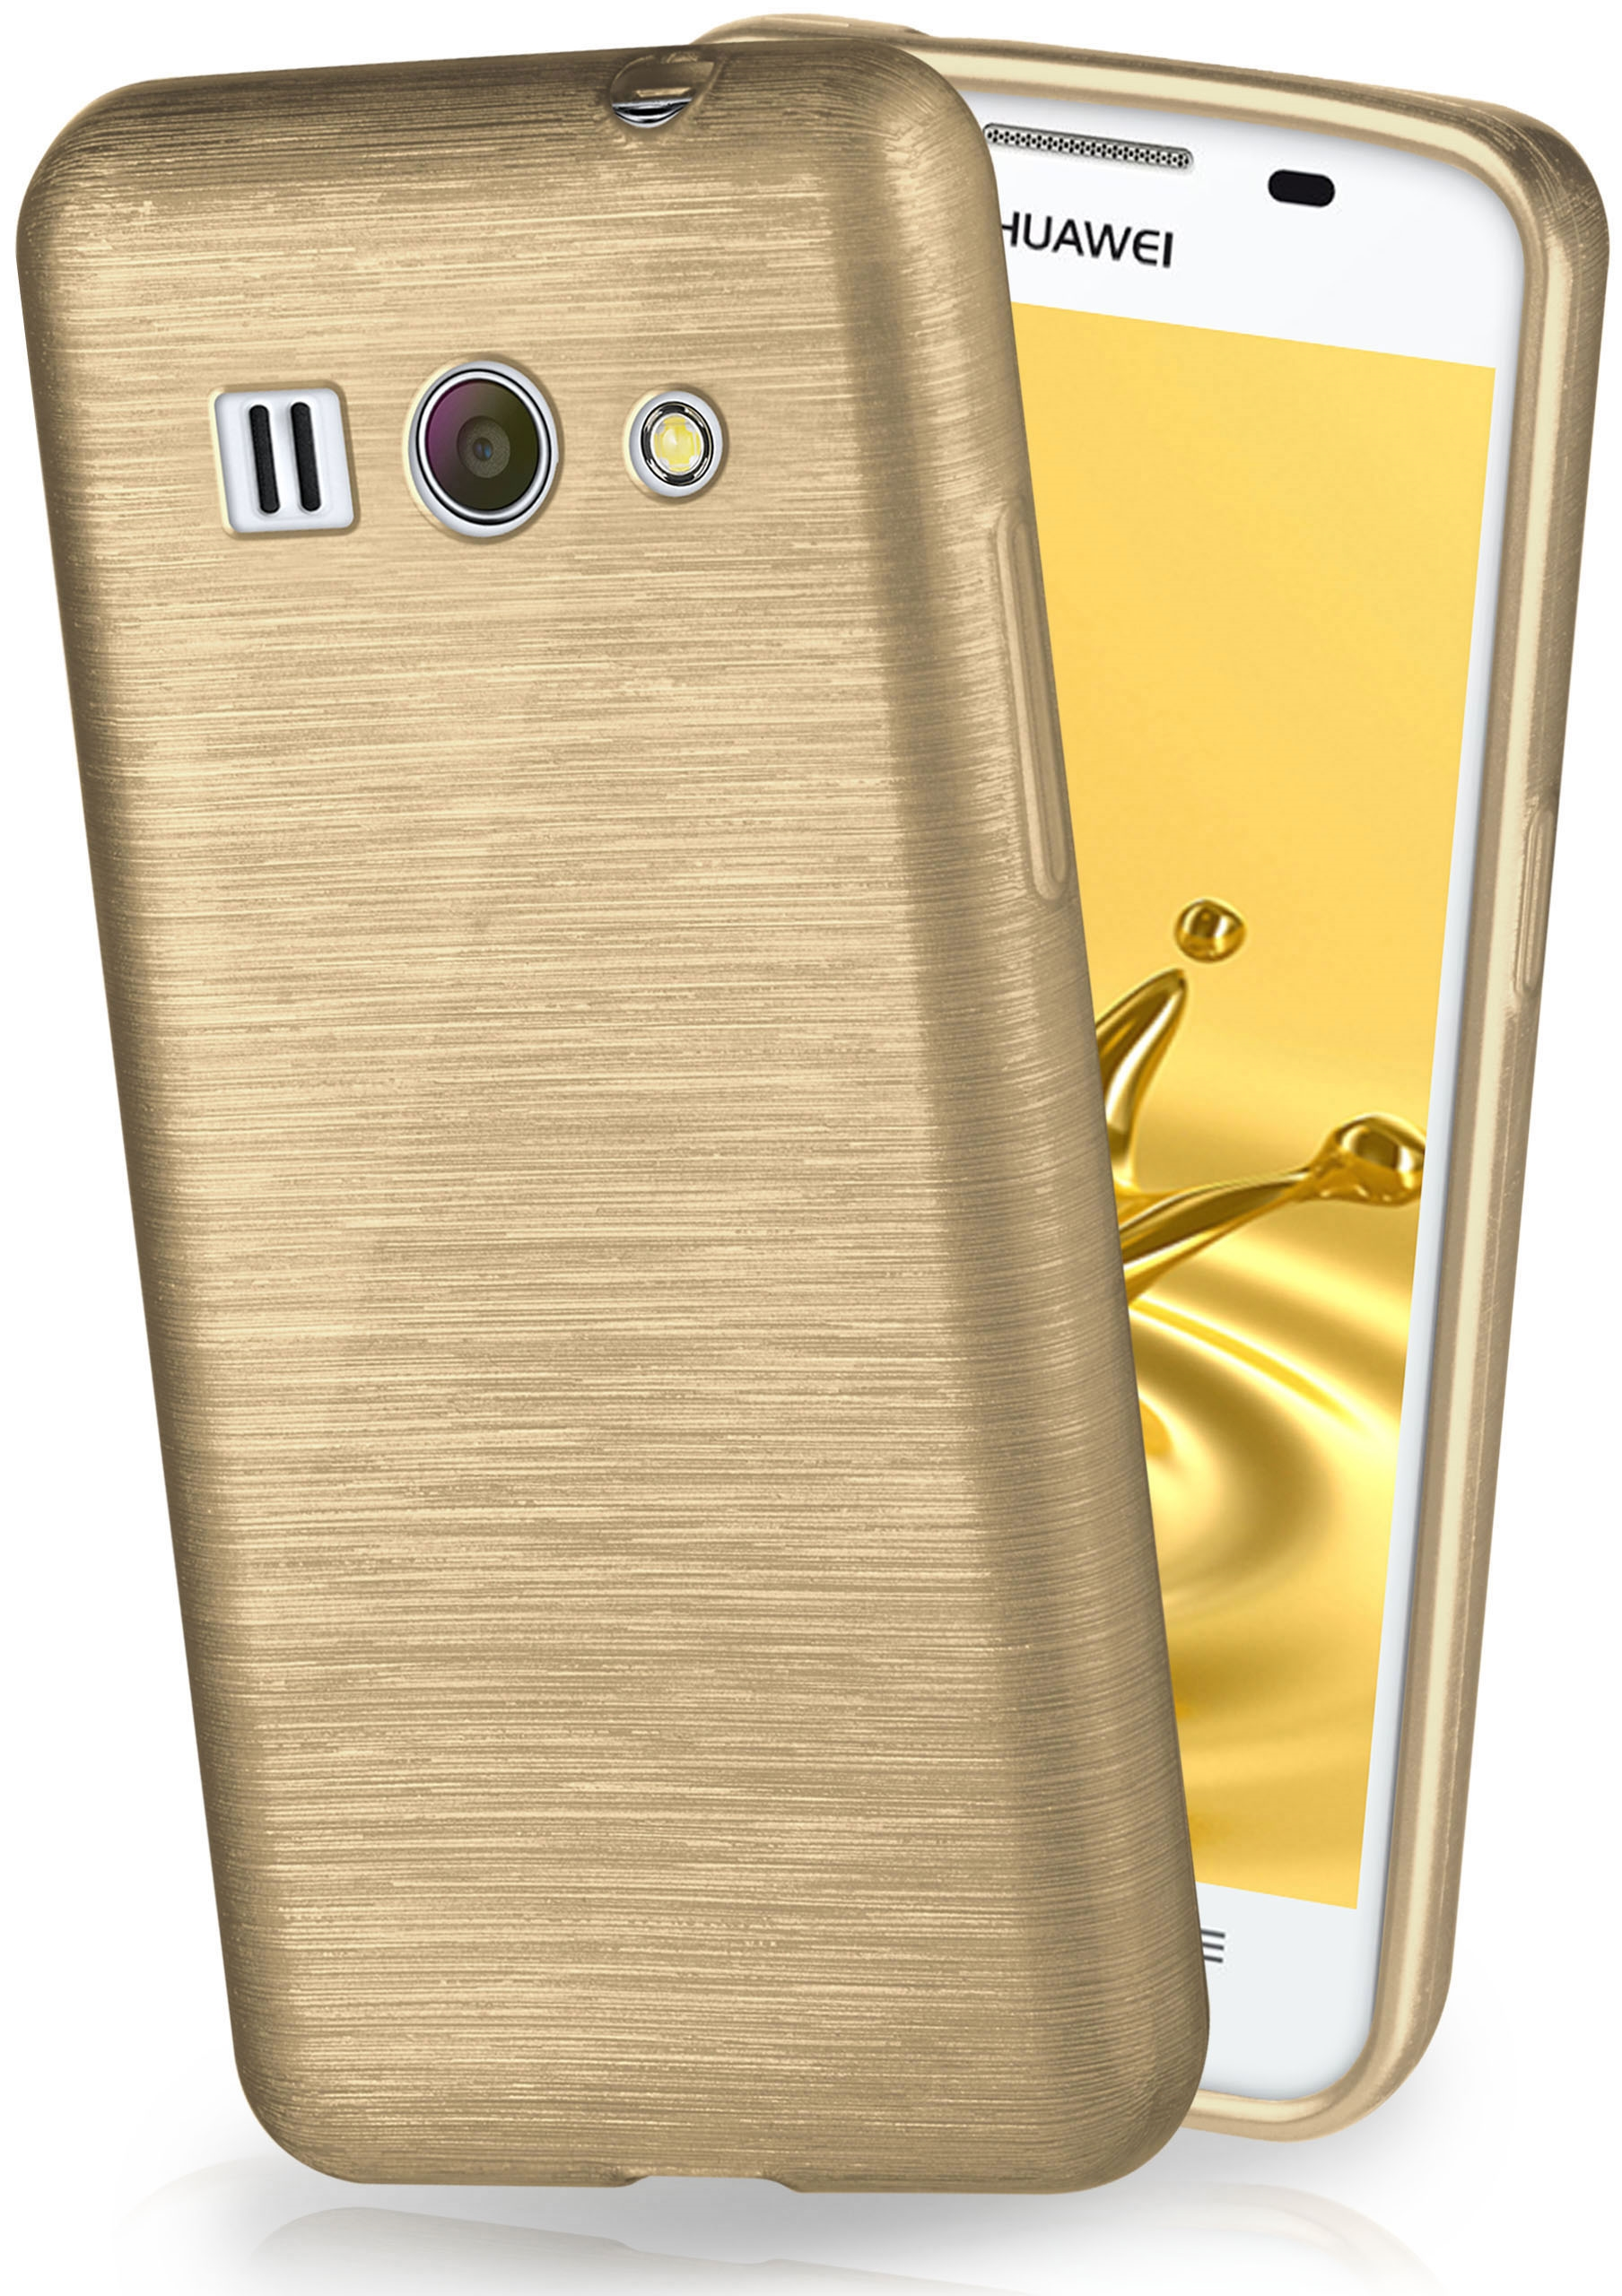 Ascend Backcover, Brushed MOEX Huawei, Ivory-Gold G520/525, Case,